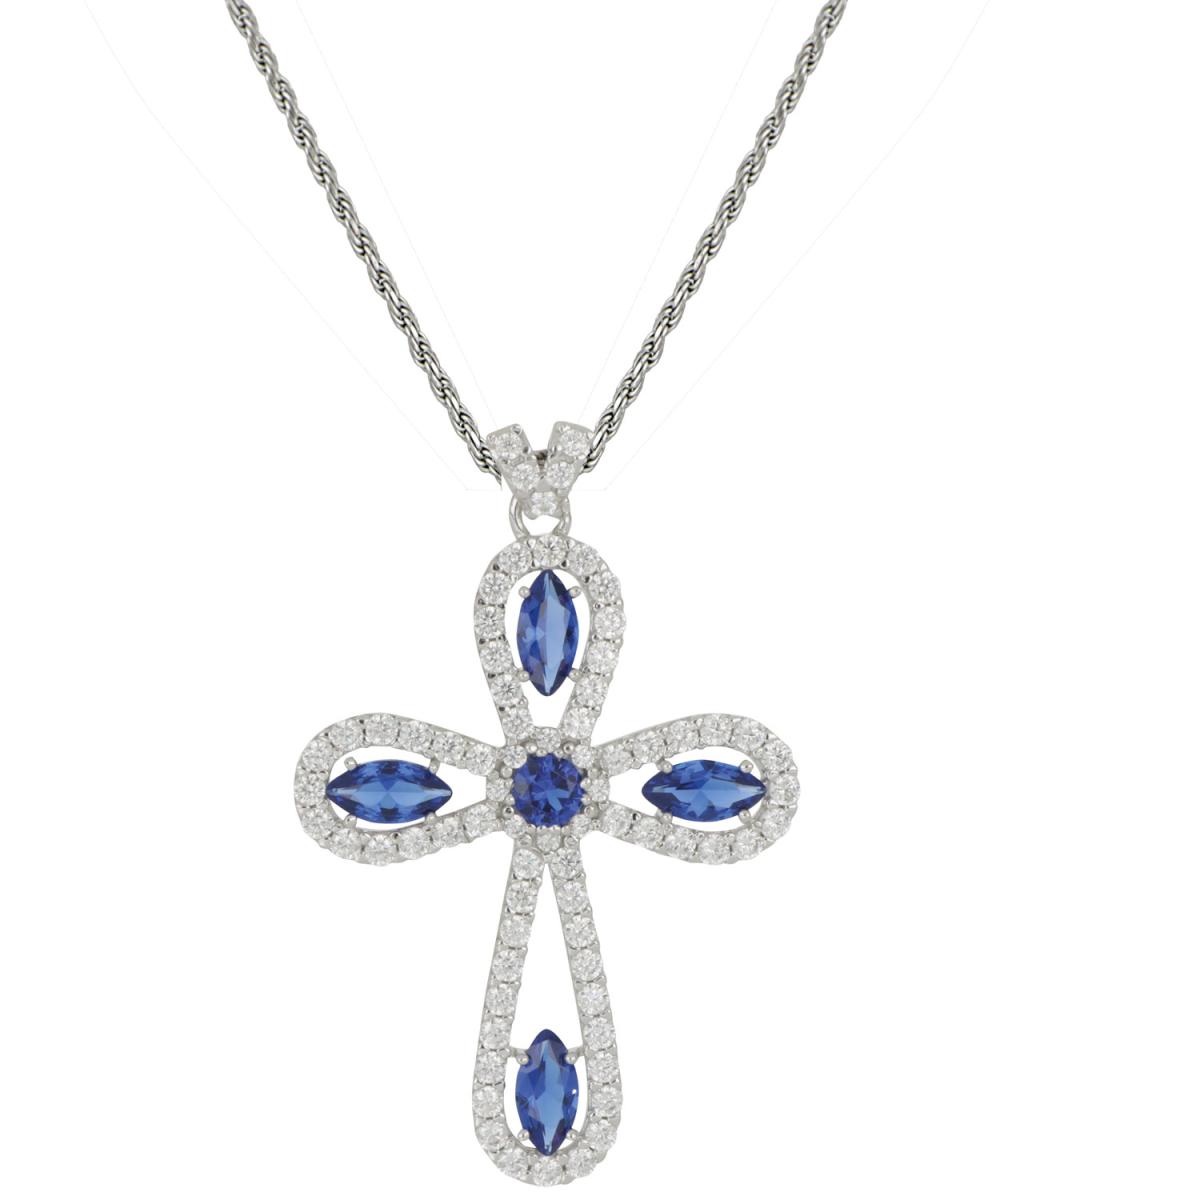 Cross necklace in 925 rhodium-plated silver with zircons and siamites available in various colors - ZCL1408